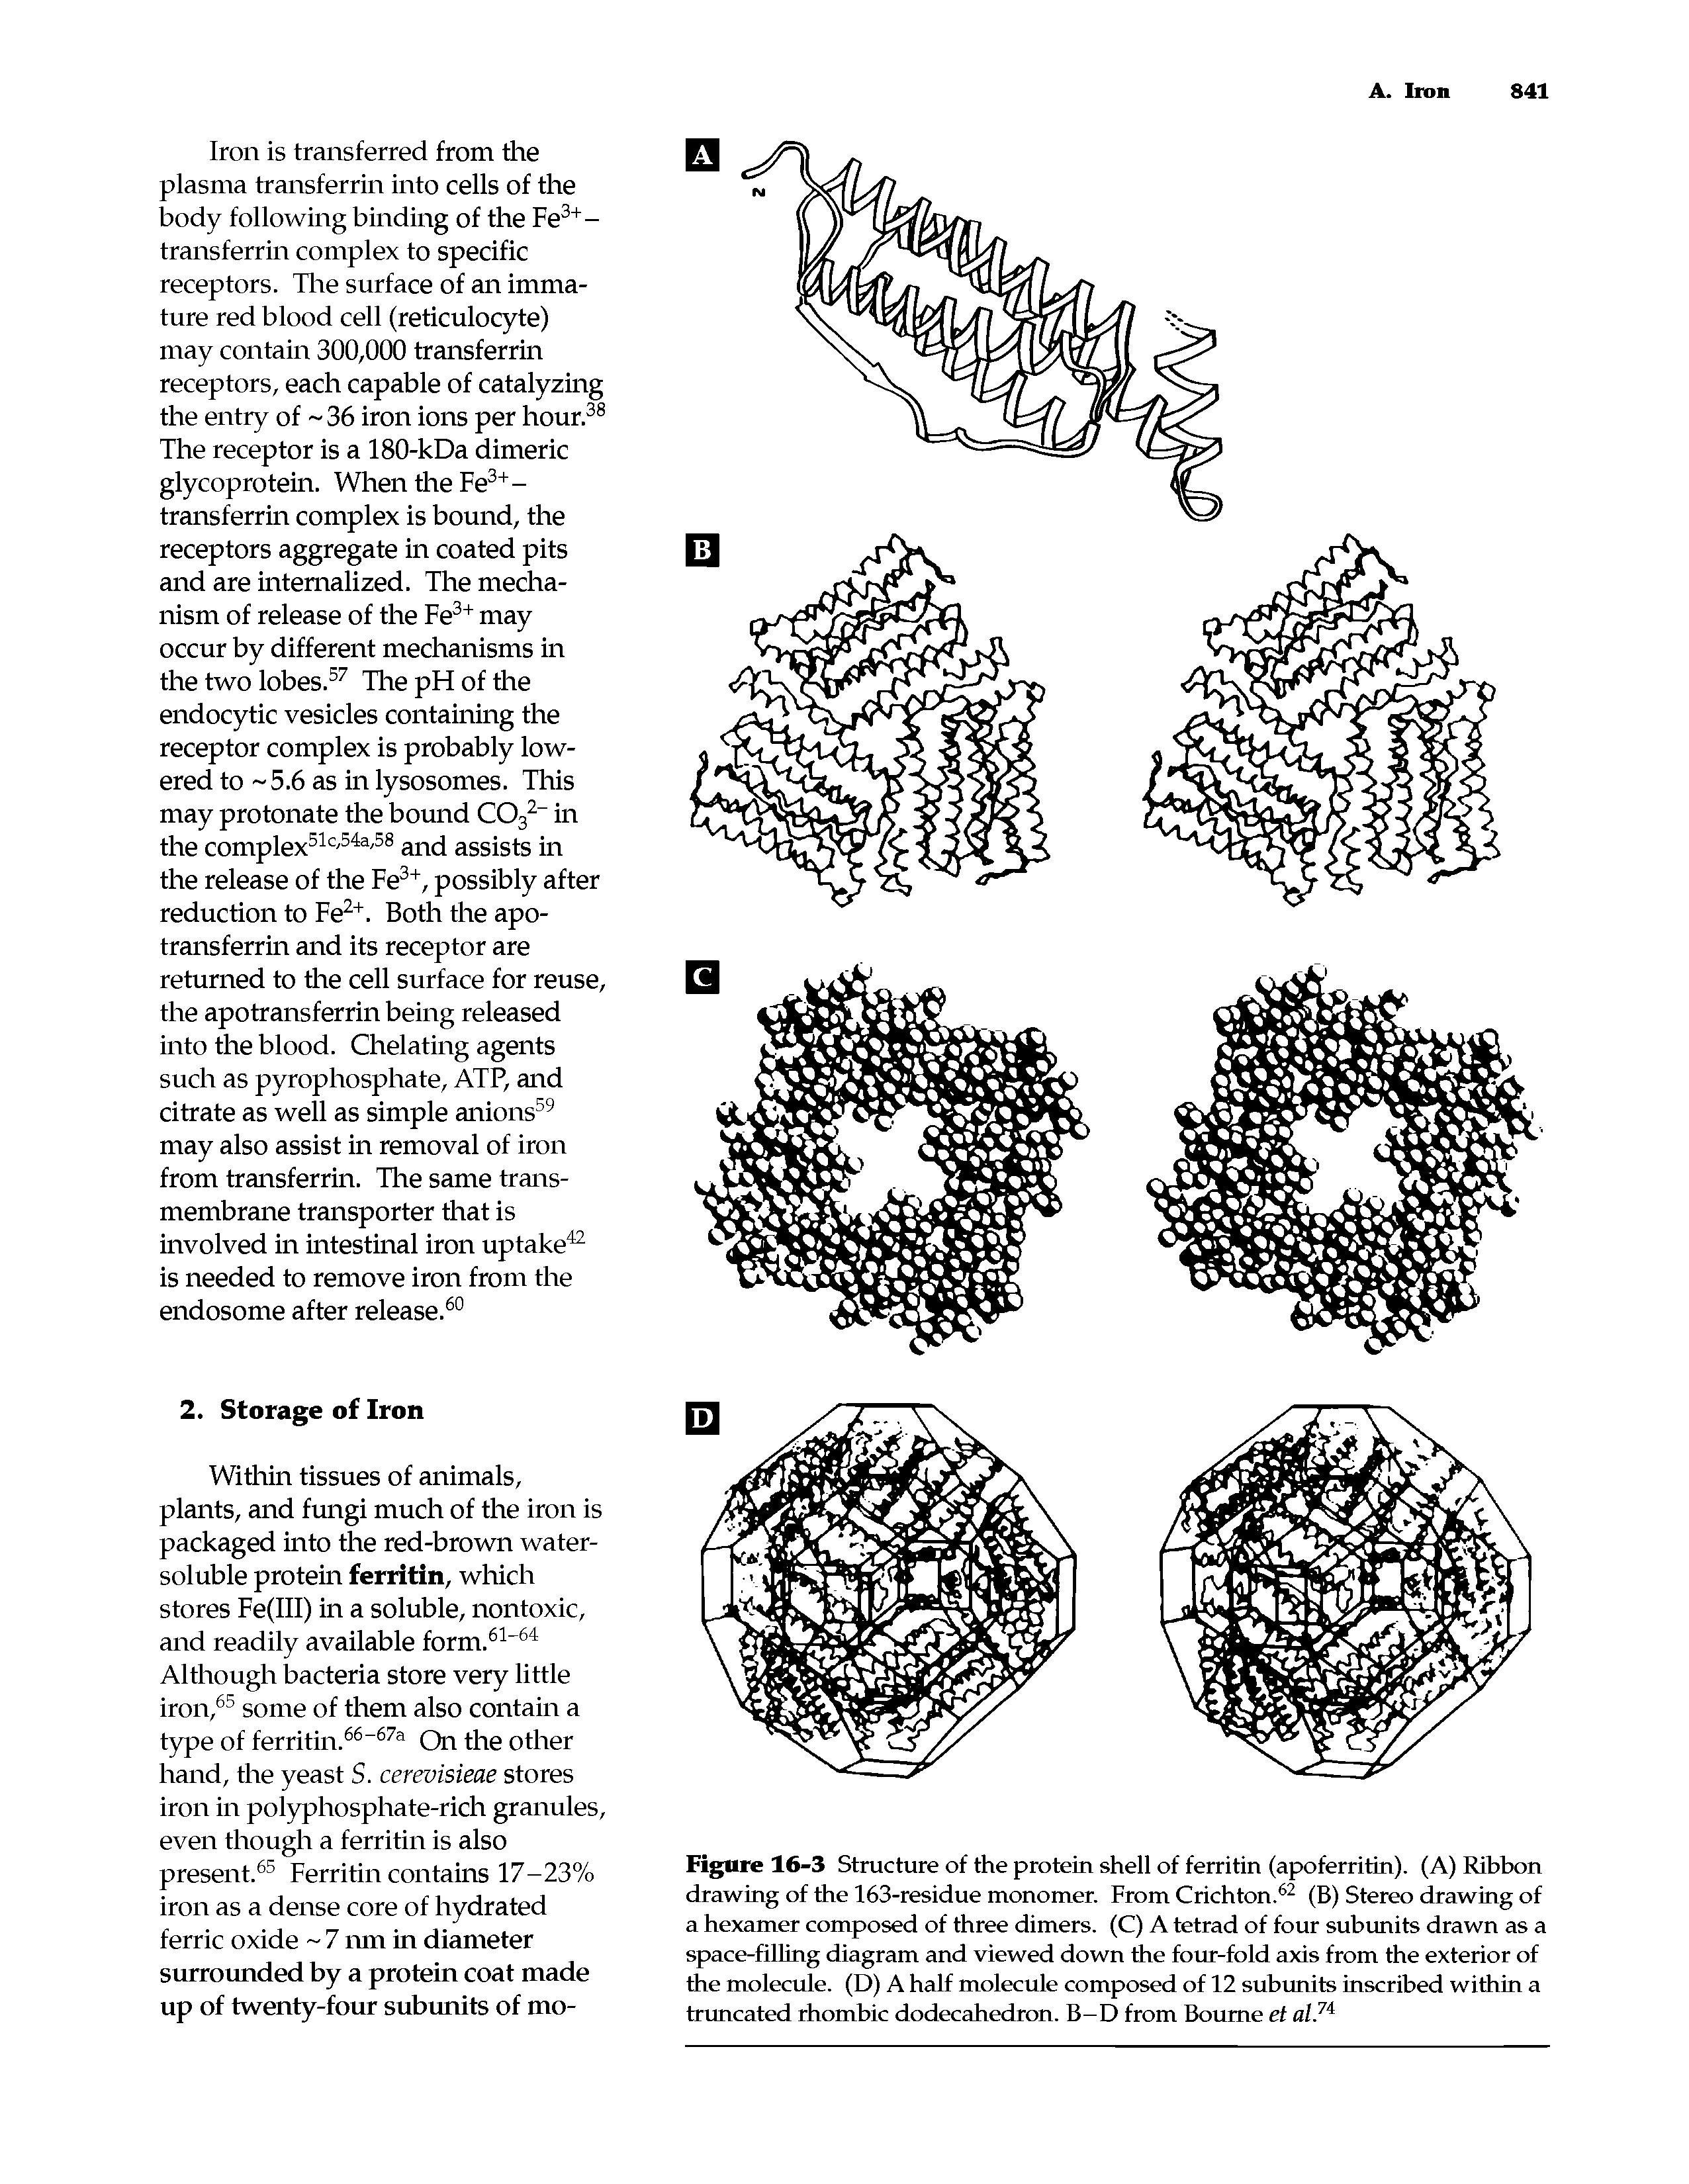 Figure 16-3 Structure of the protein shell of ferritin (apoferritin). (A) Ribbon drawing of the 163-residue monomer. From Crichton.62 (B) Stereo drawing of a hexamer composed of three dimers. (C) A tetrad of four subunits drawn as a space-filling diagram and viewed down the four-fold axis from the exterior of the molecule. (D) A half molecule composed of 12 subunits inscribed within a truncated rhombic dodecahedron. B-D from Bourne et al.7i...